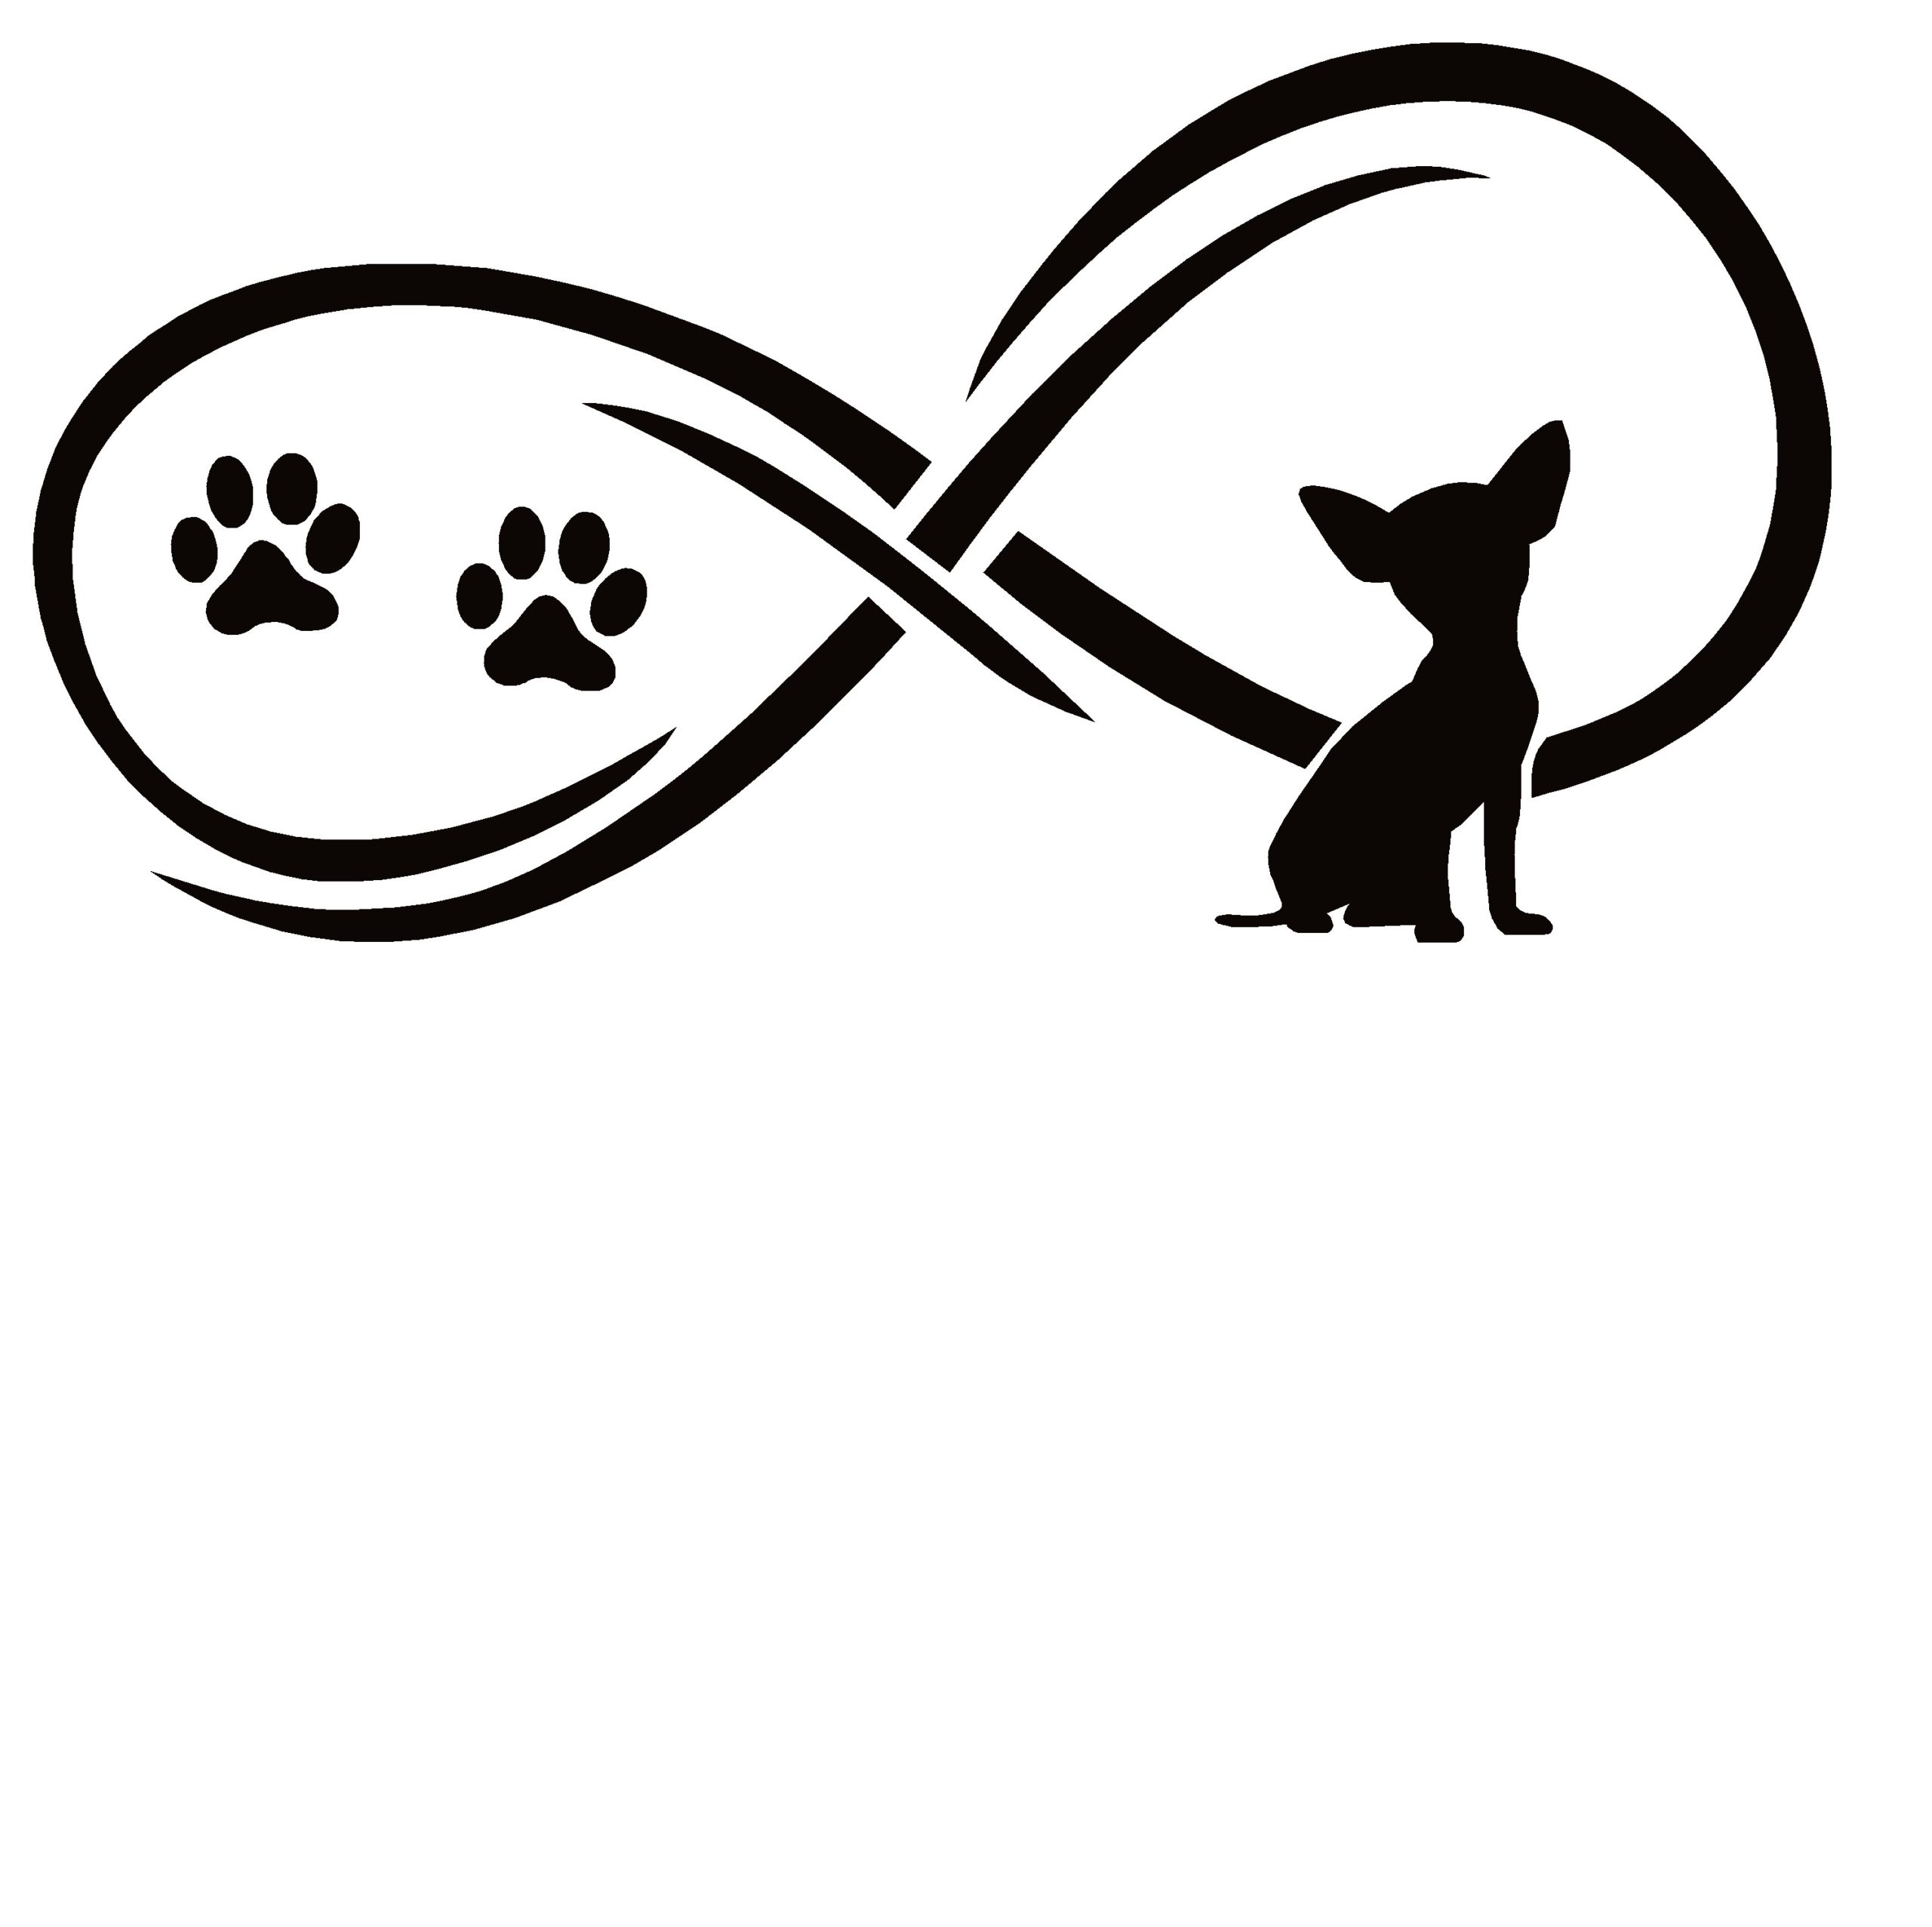 Chihuahua Dog Infinity Love Decal Sticker - Chi Love - 7189